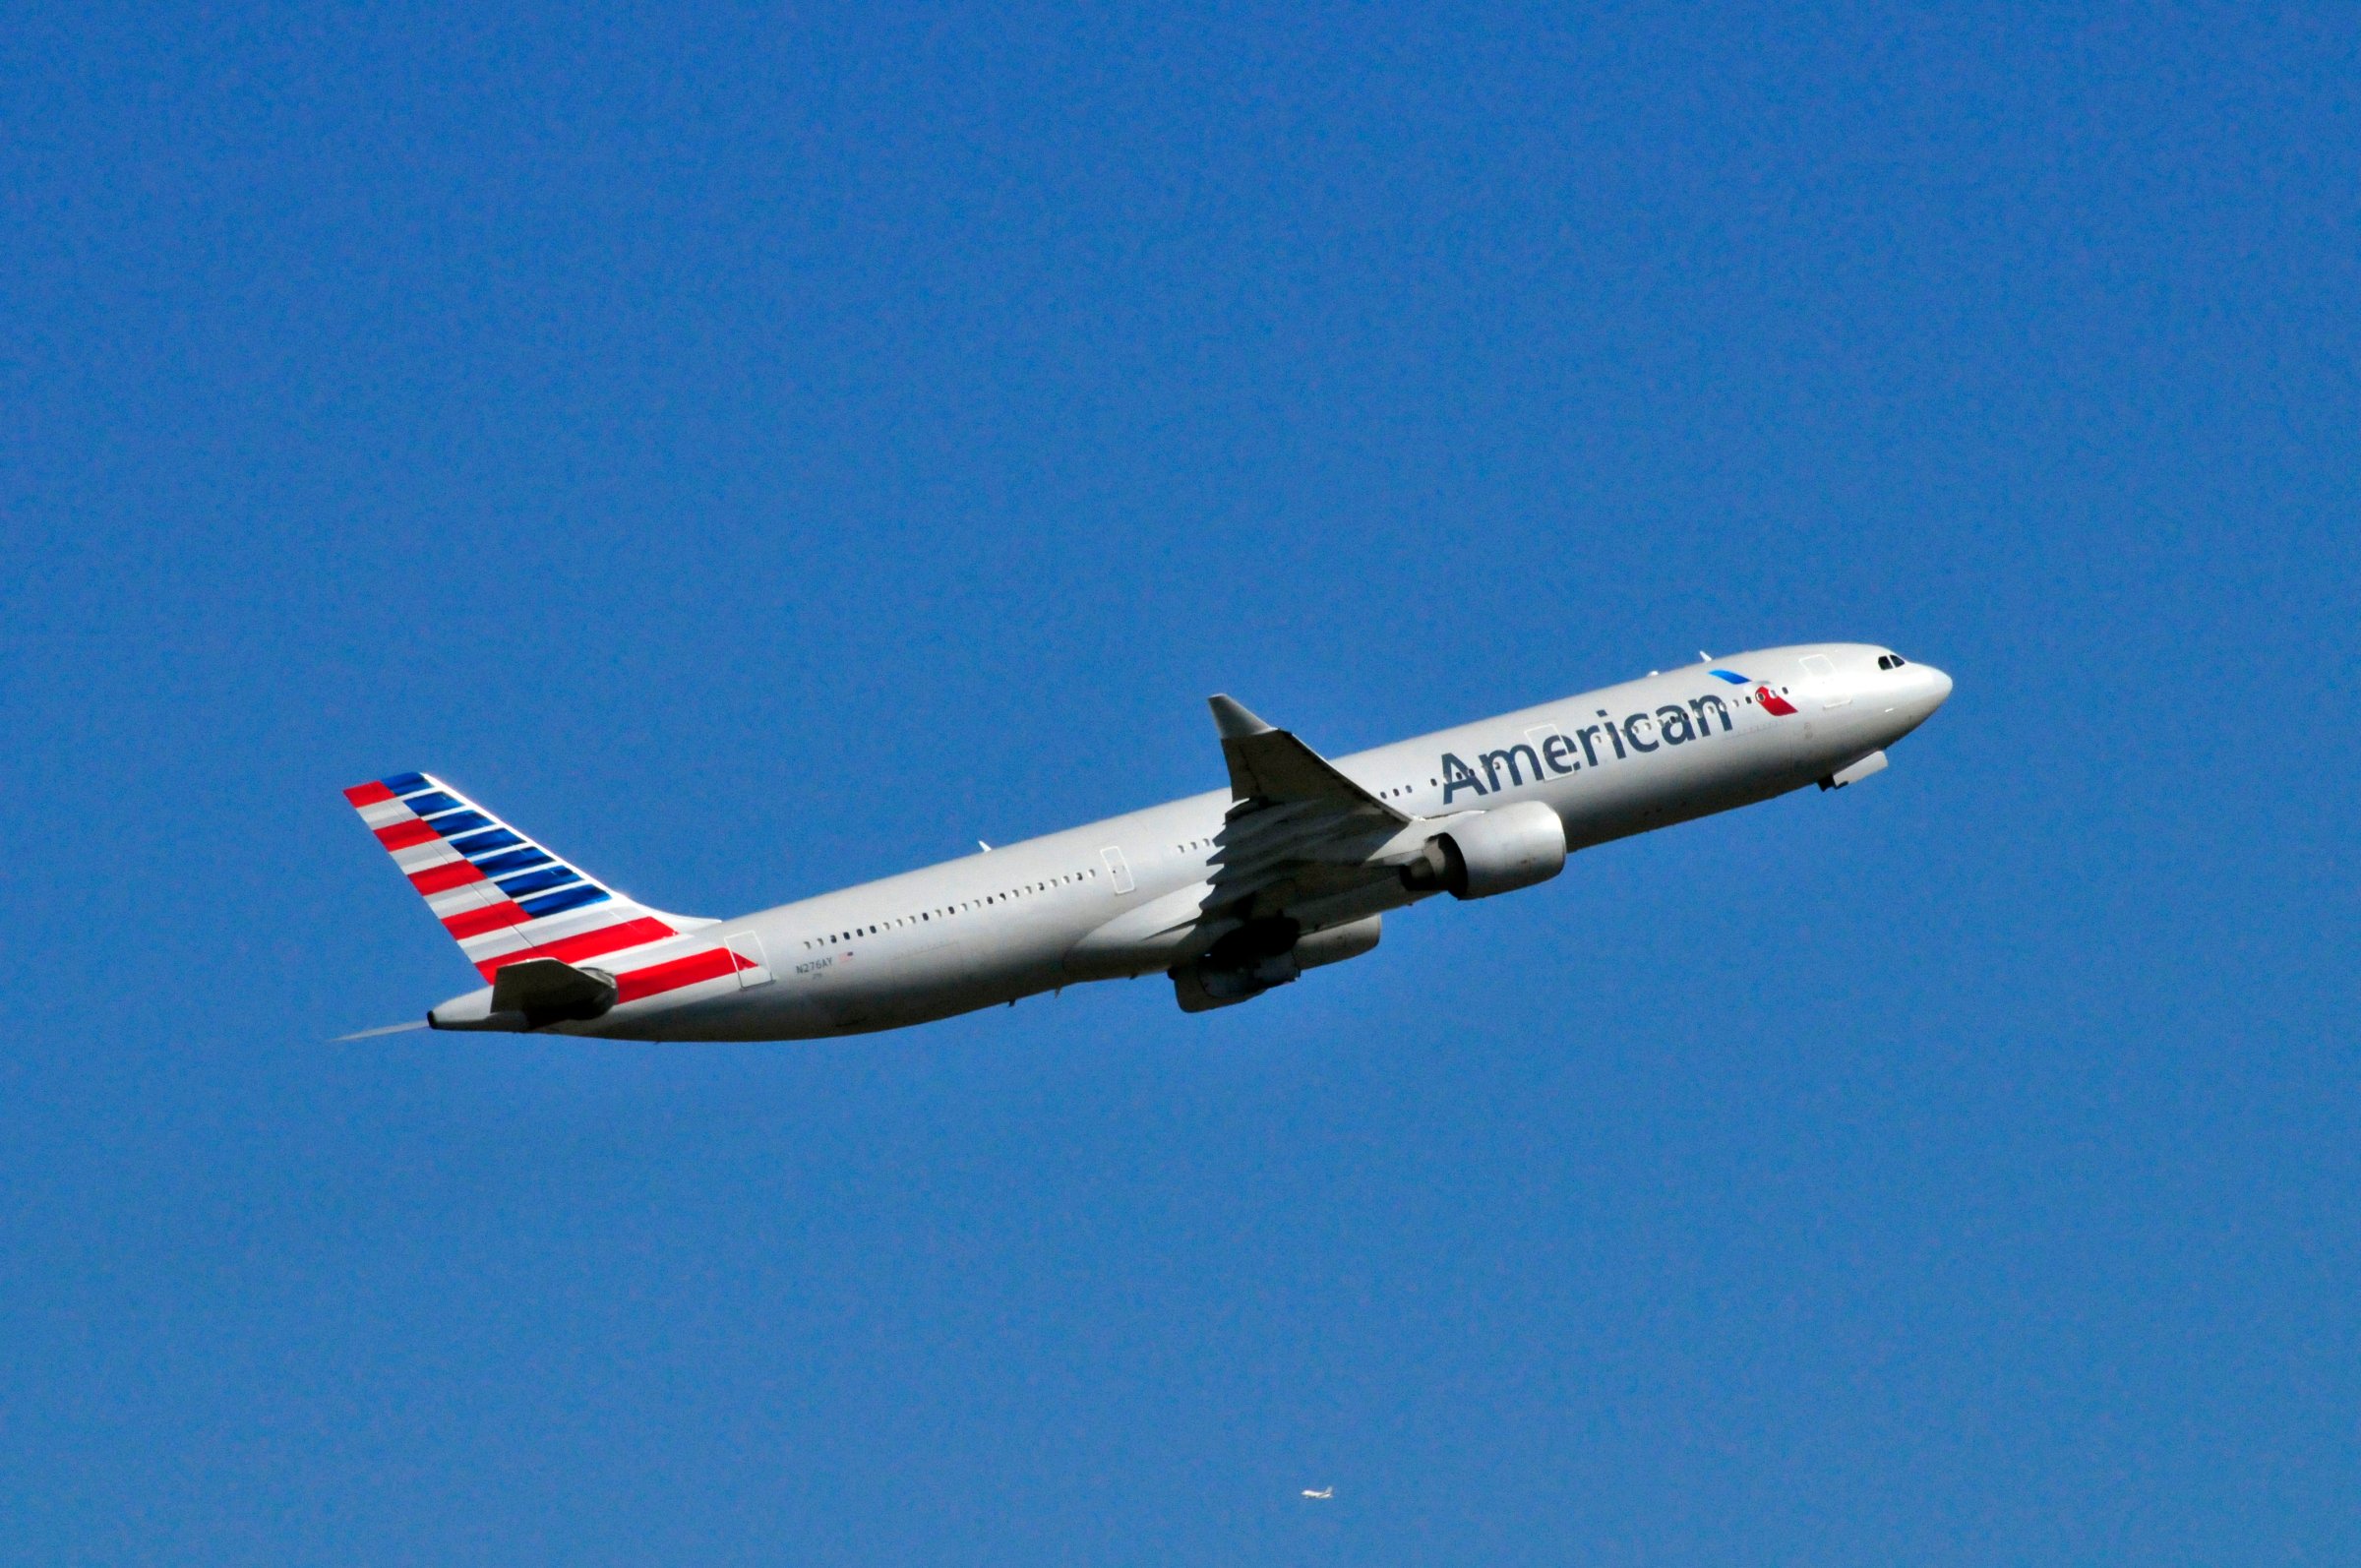 Airbus A330-N276AY belonging to American Airlines.